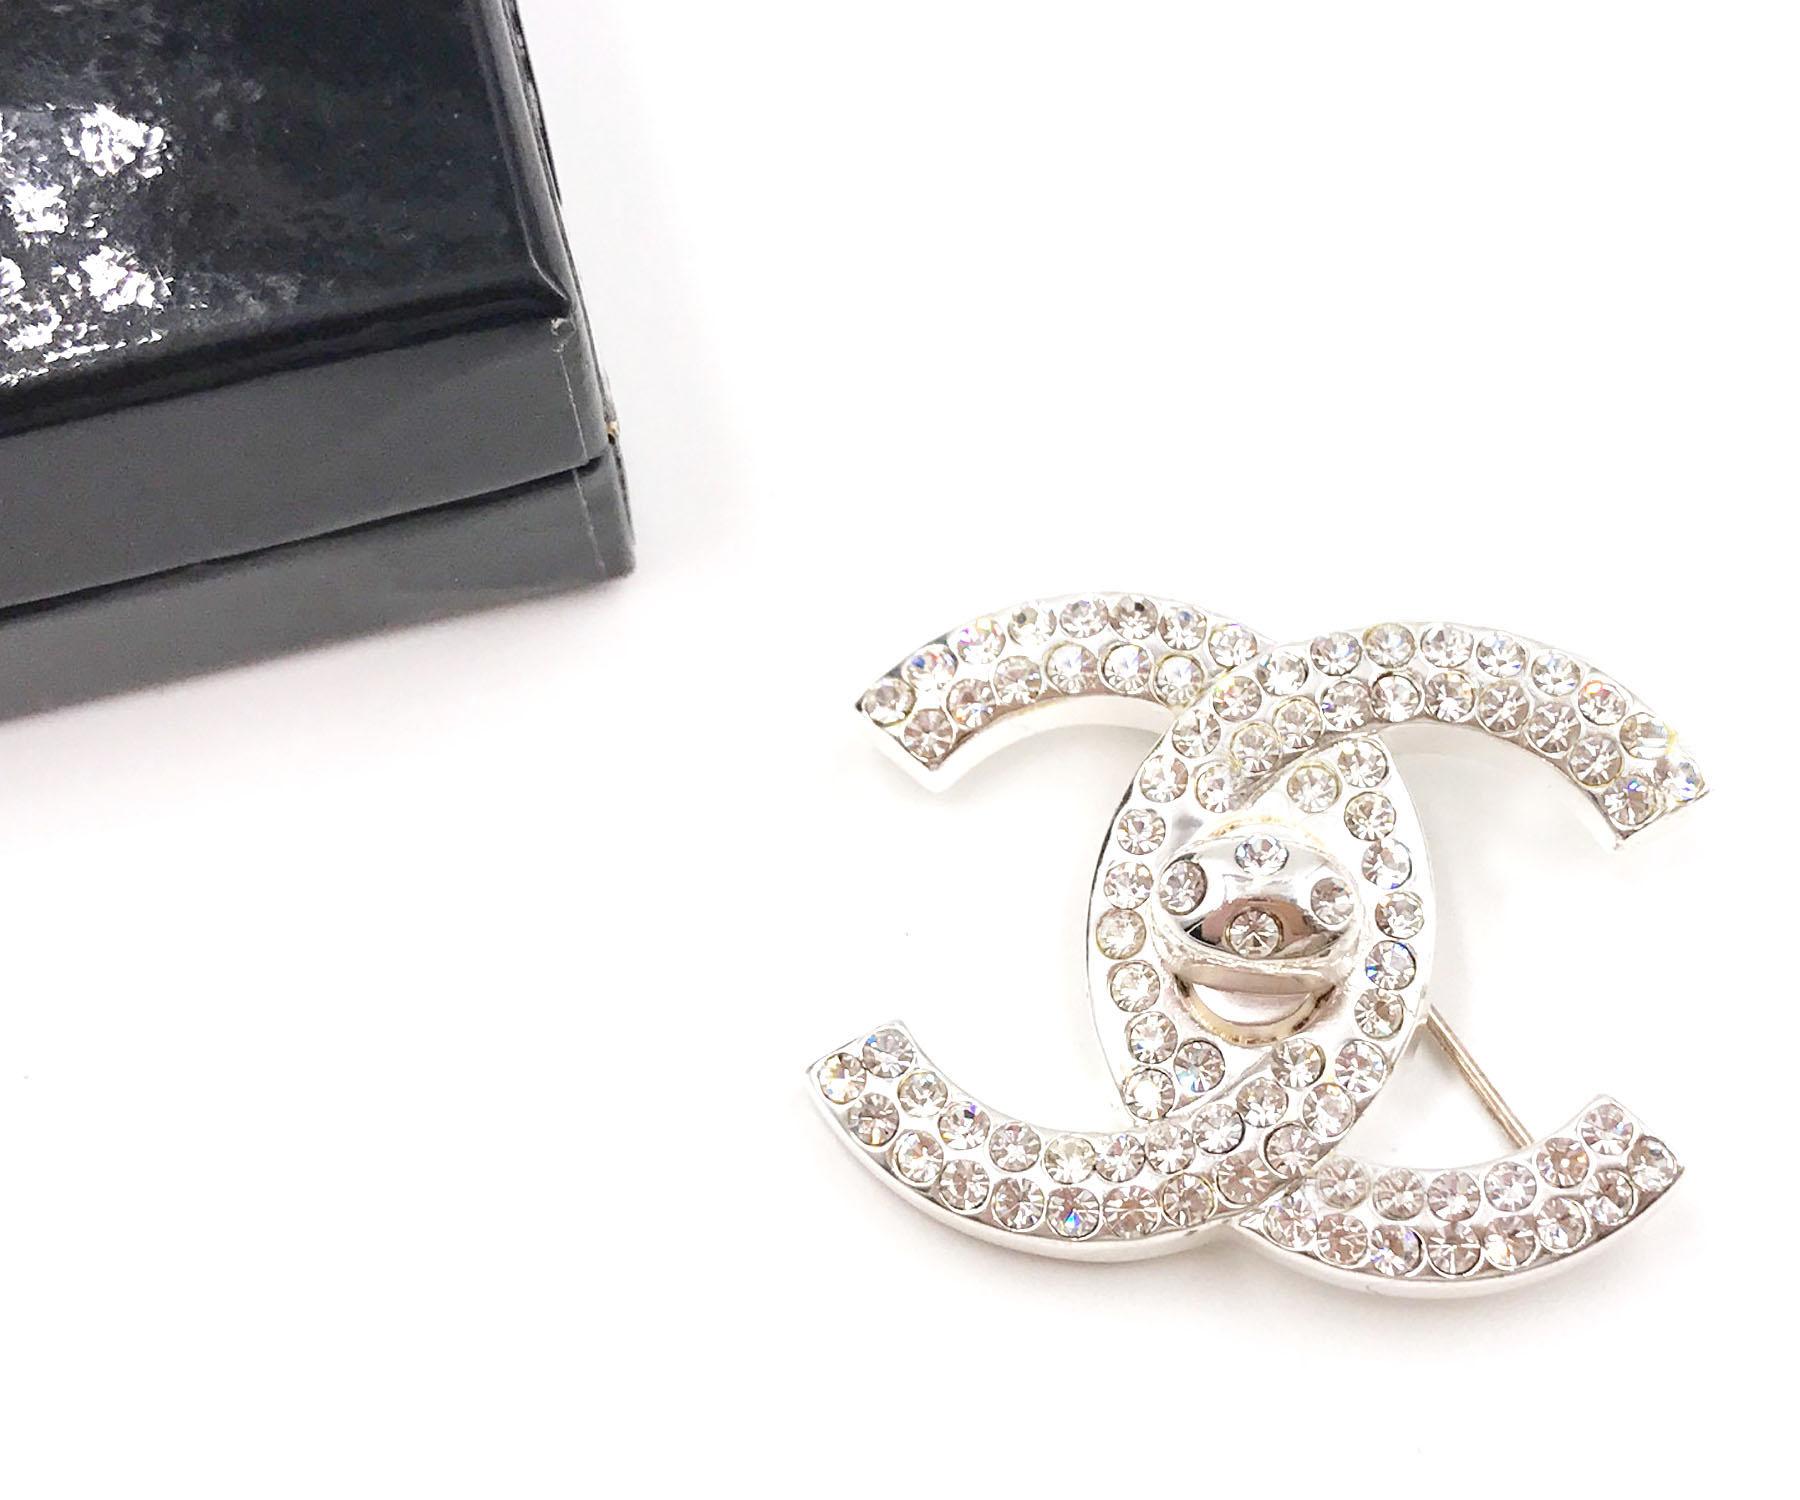 Chanel Vintage Silver CC Crystal Turnlock Brooch

* Marked 96
* Made in France
* Comes with the original box

-It is approximately 1.5